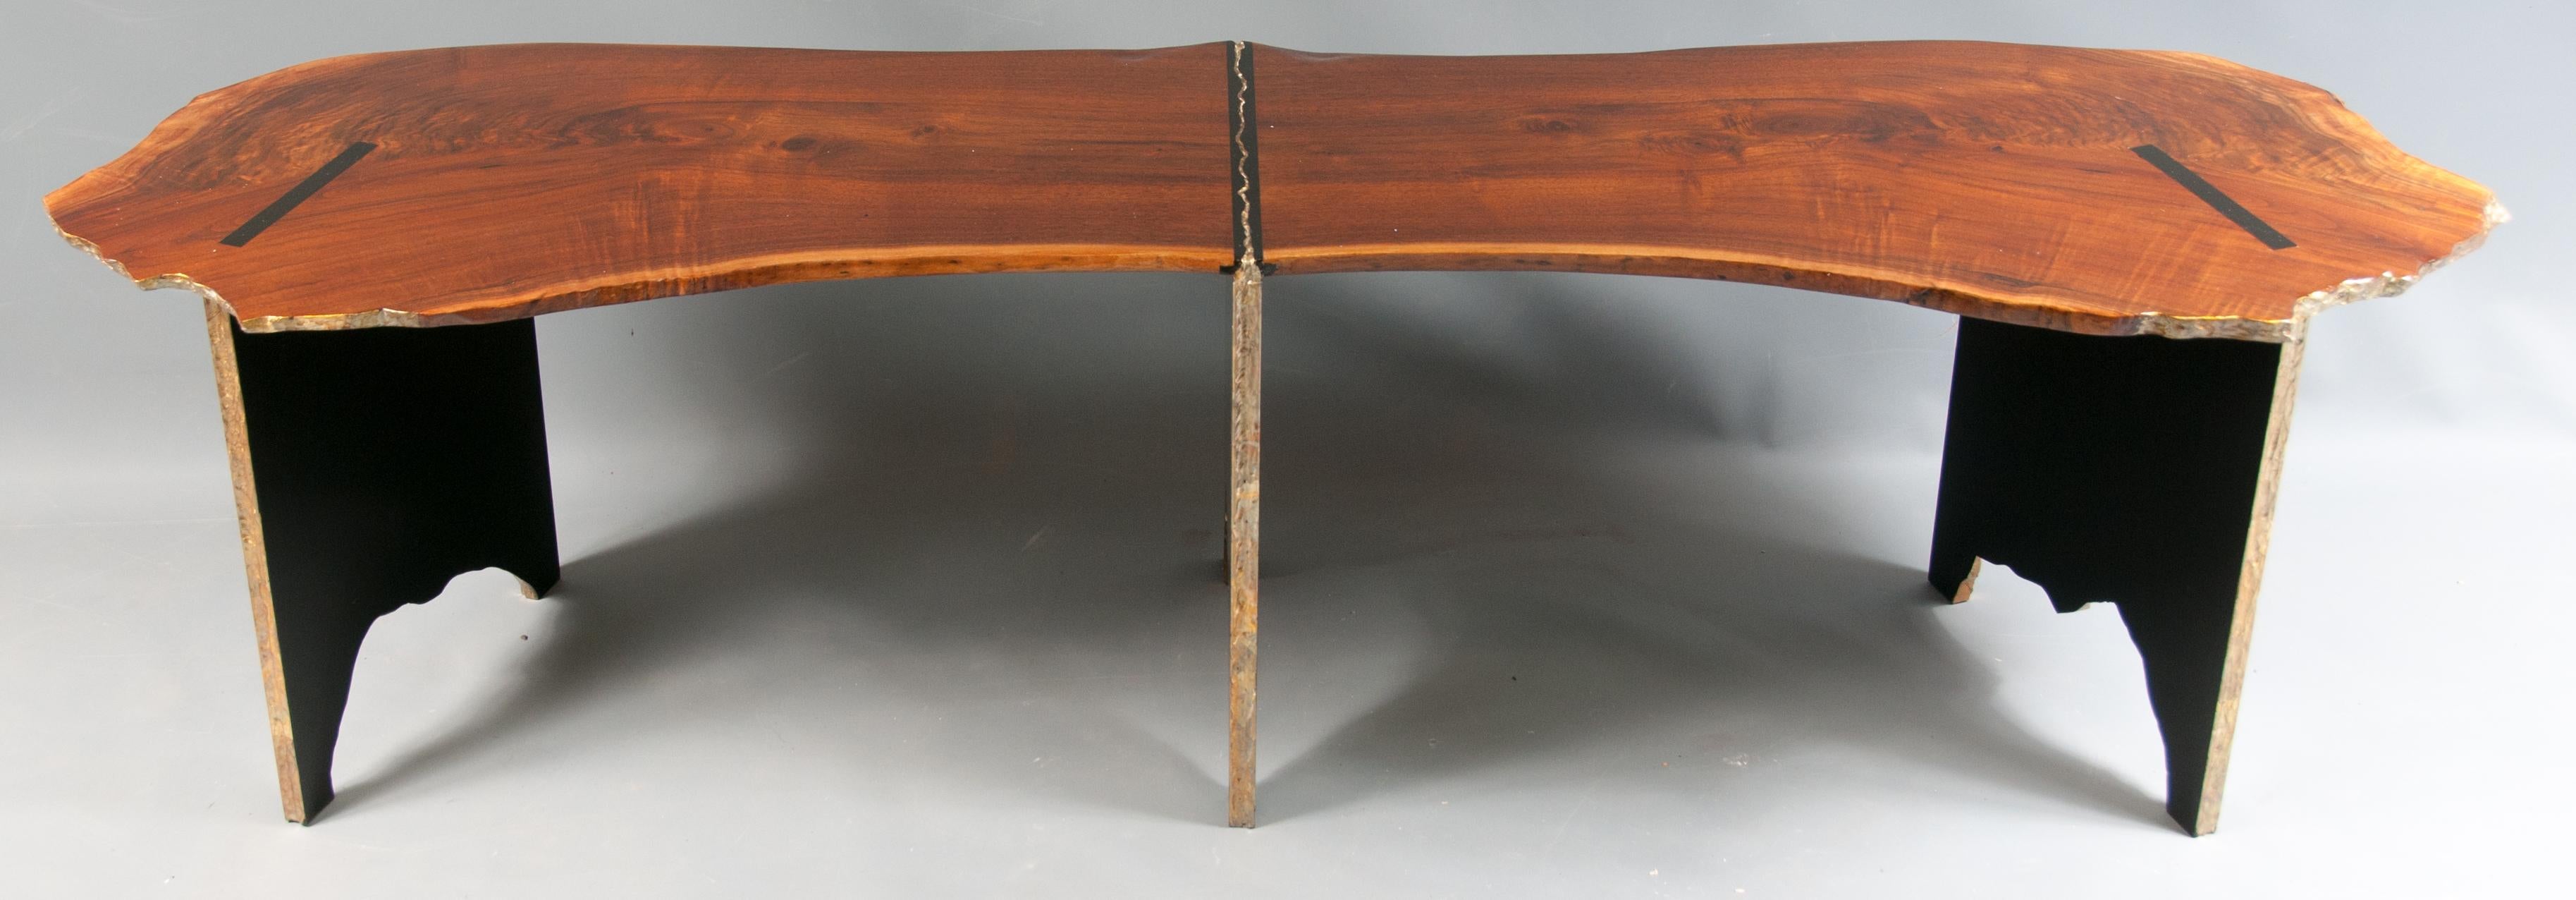 Live Edge Walnut Trestle Form Coffee Table with Carved and Gilt Elements (Nordamerikanisch) im Angebot